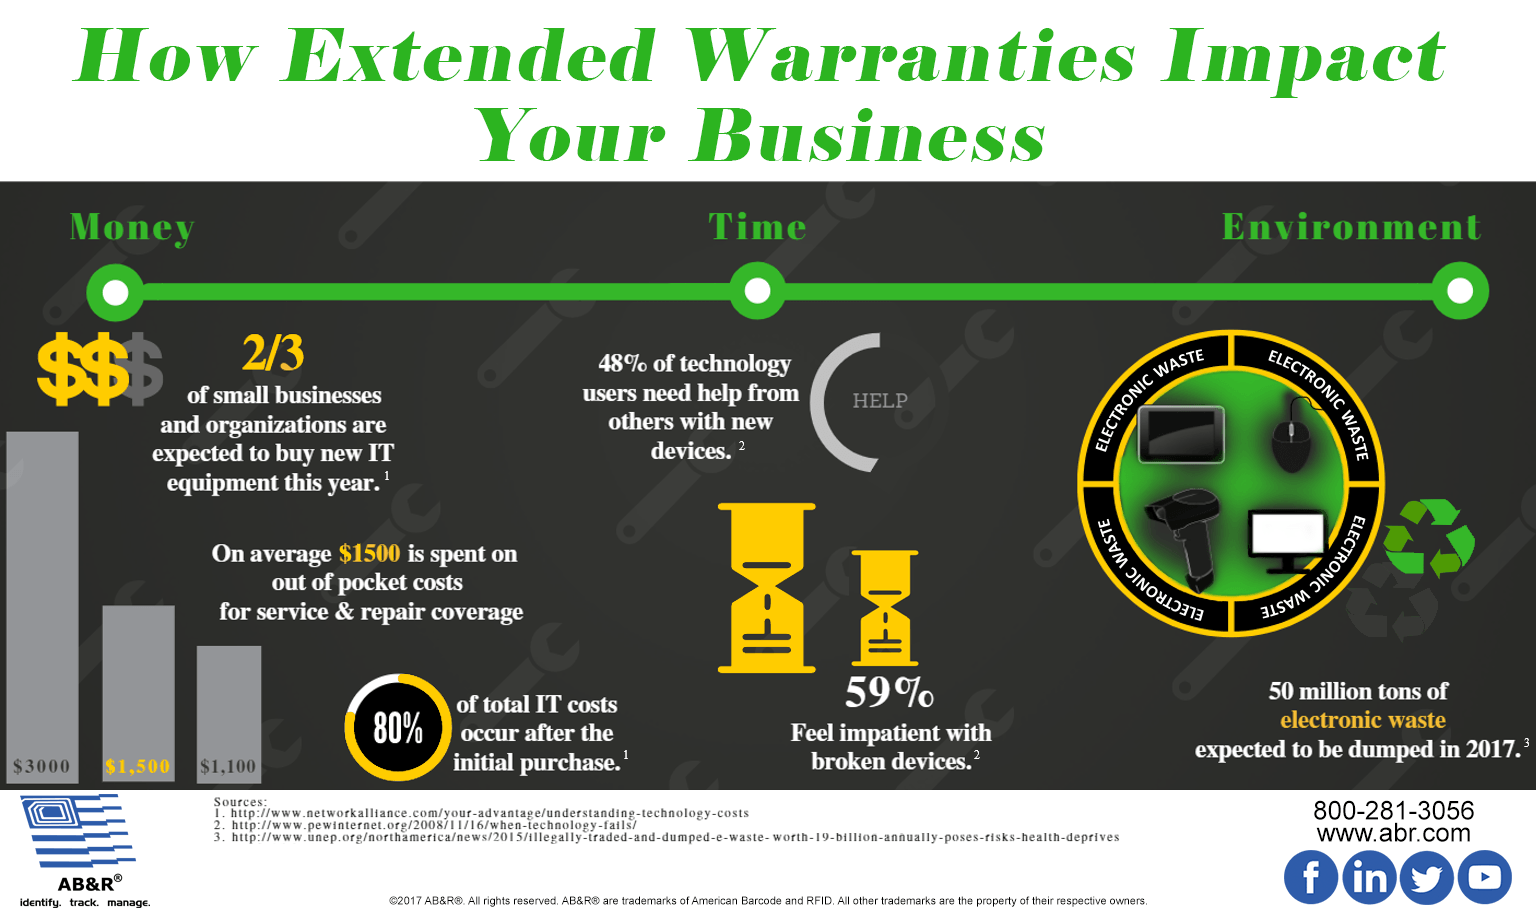 How extended warranties impact your business